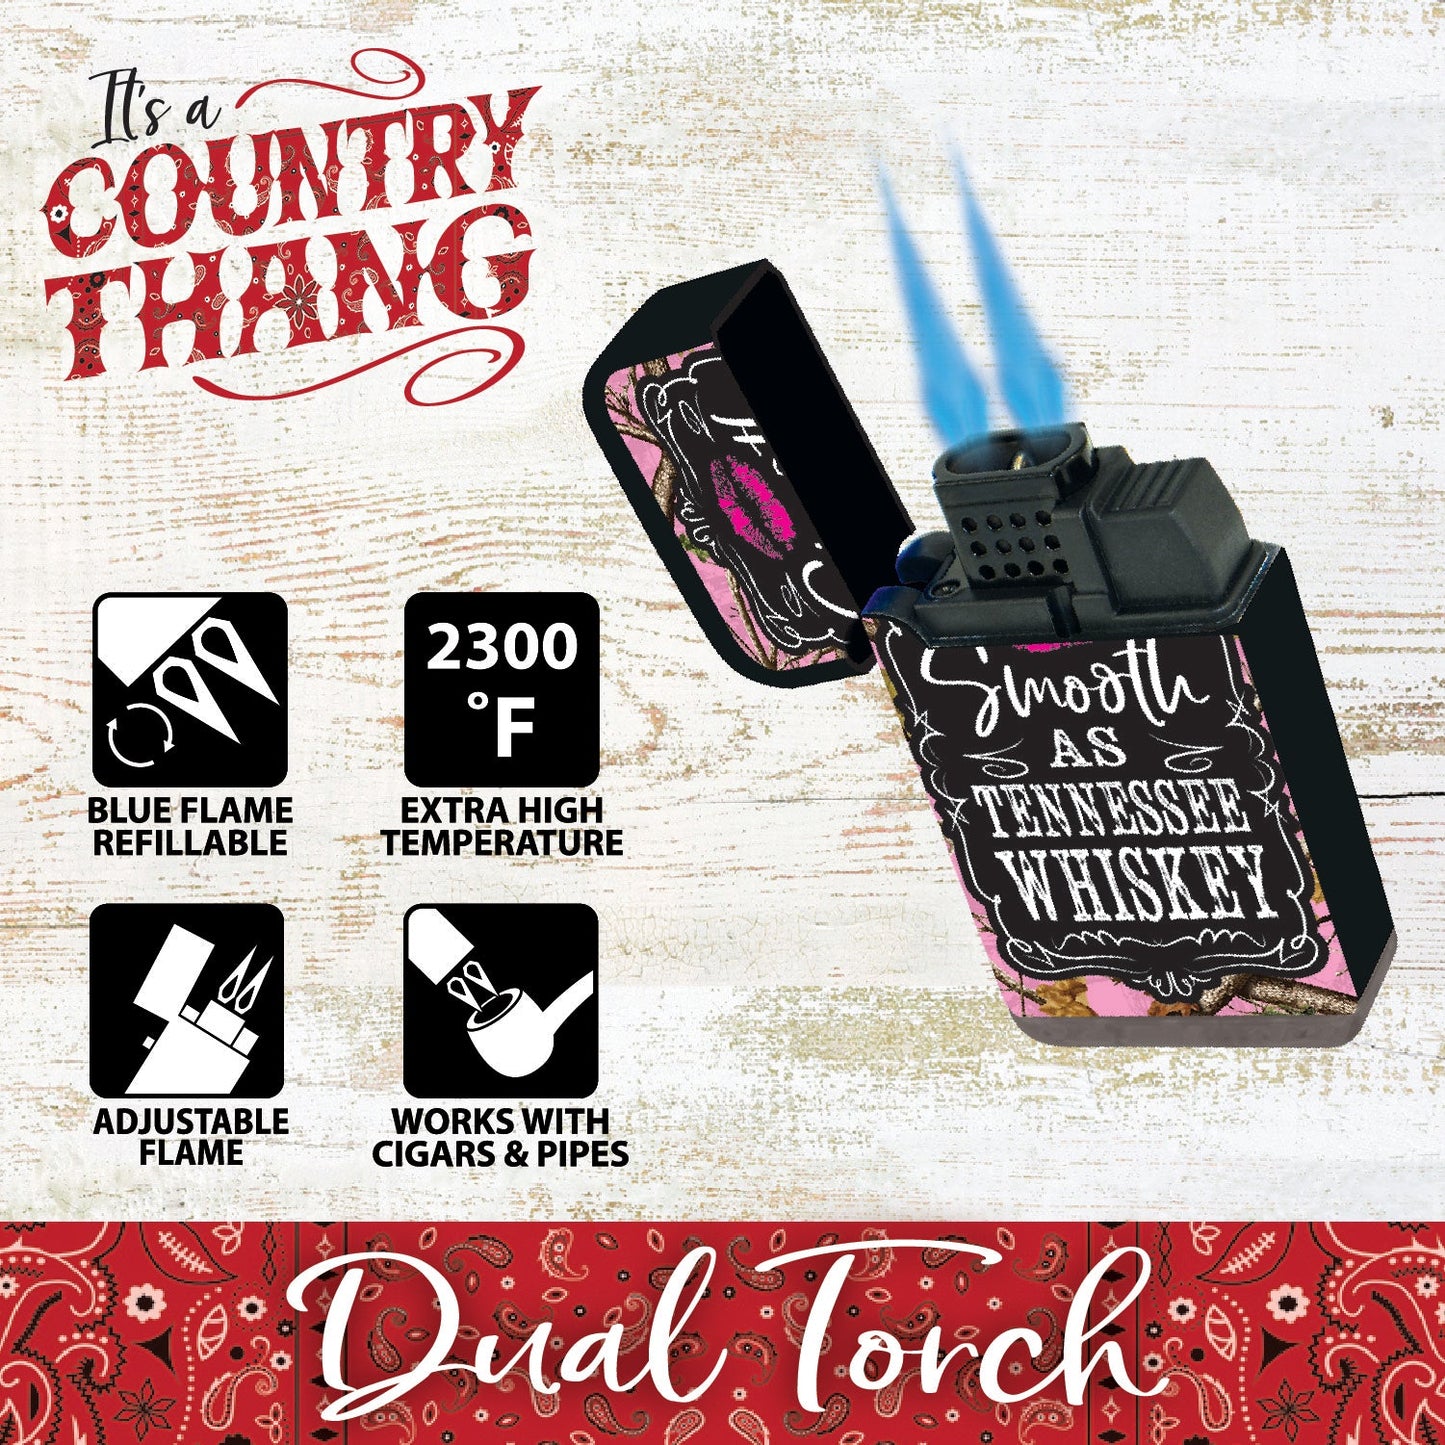 ITEM NUMBER 021909 COUNTRY GIRL DUAL TORCH 15 PIECES PER DISPLAY